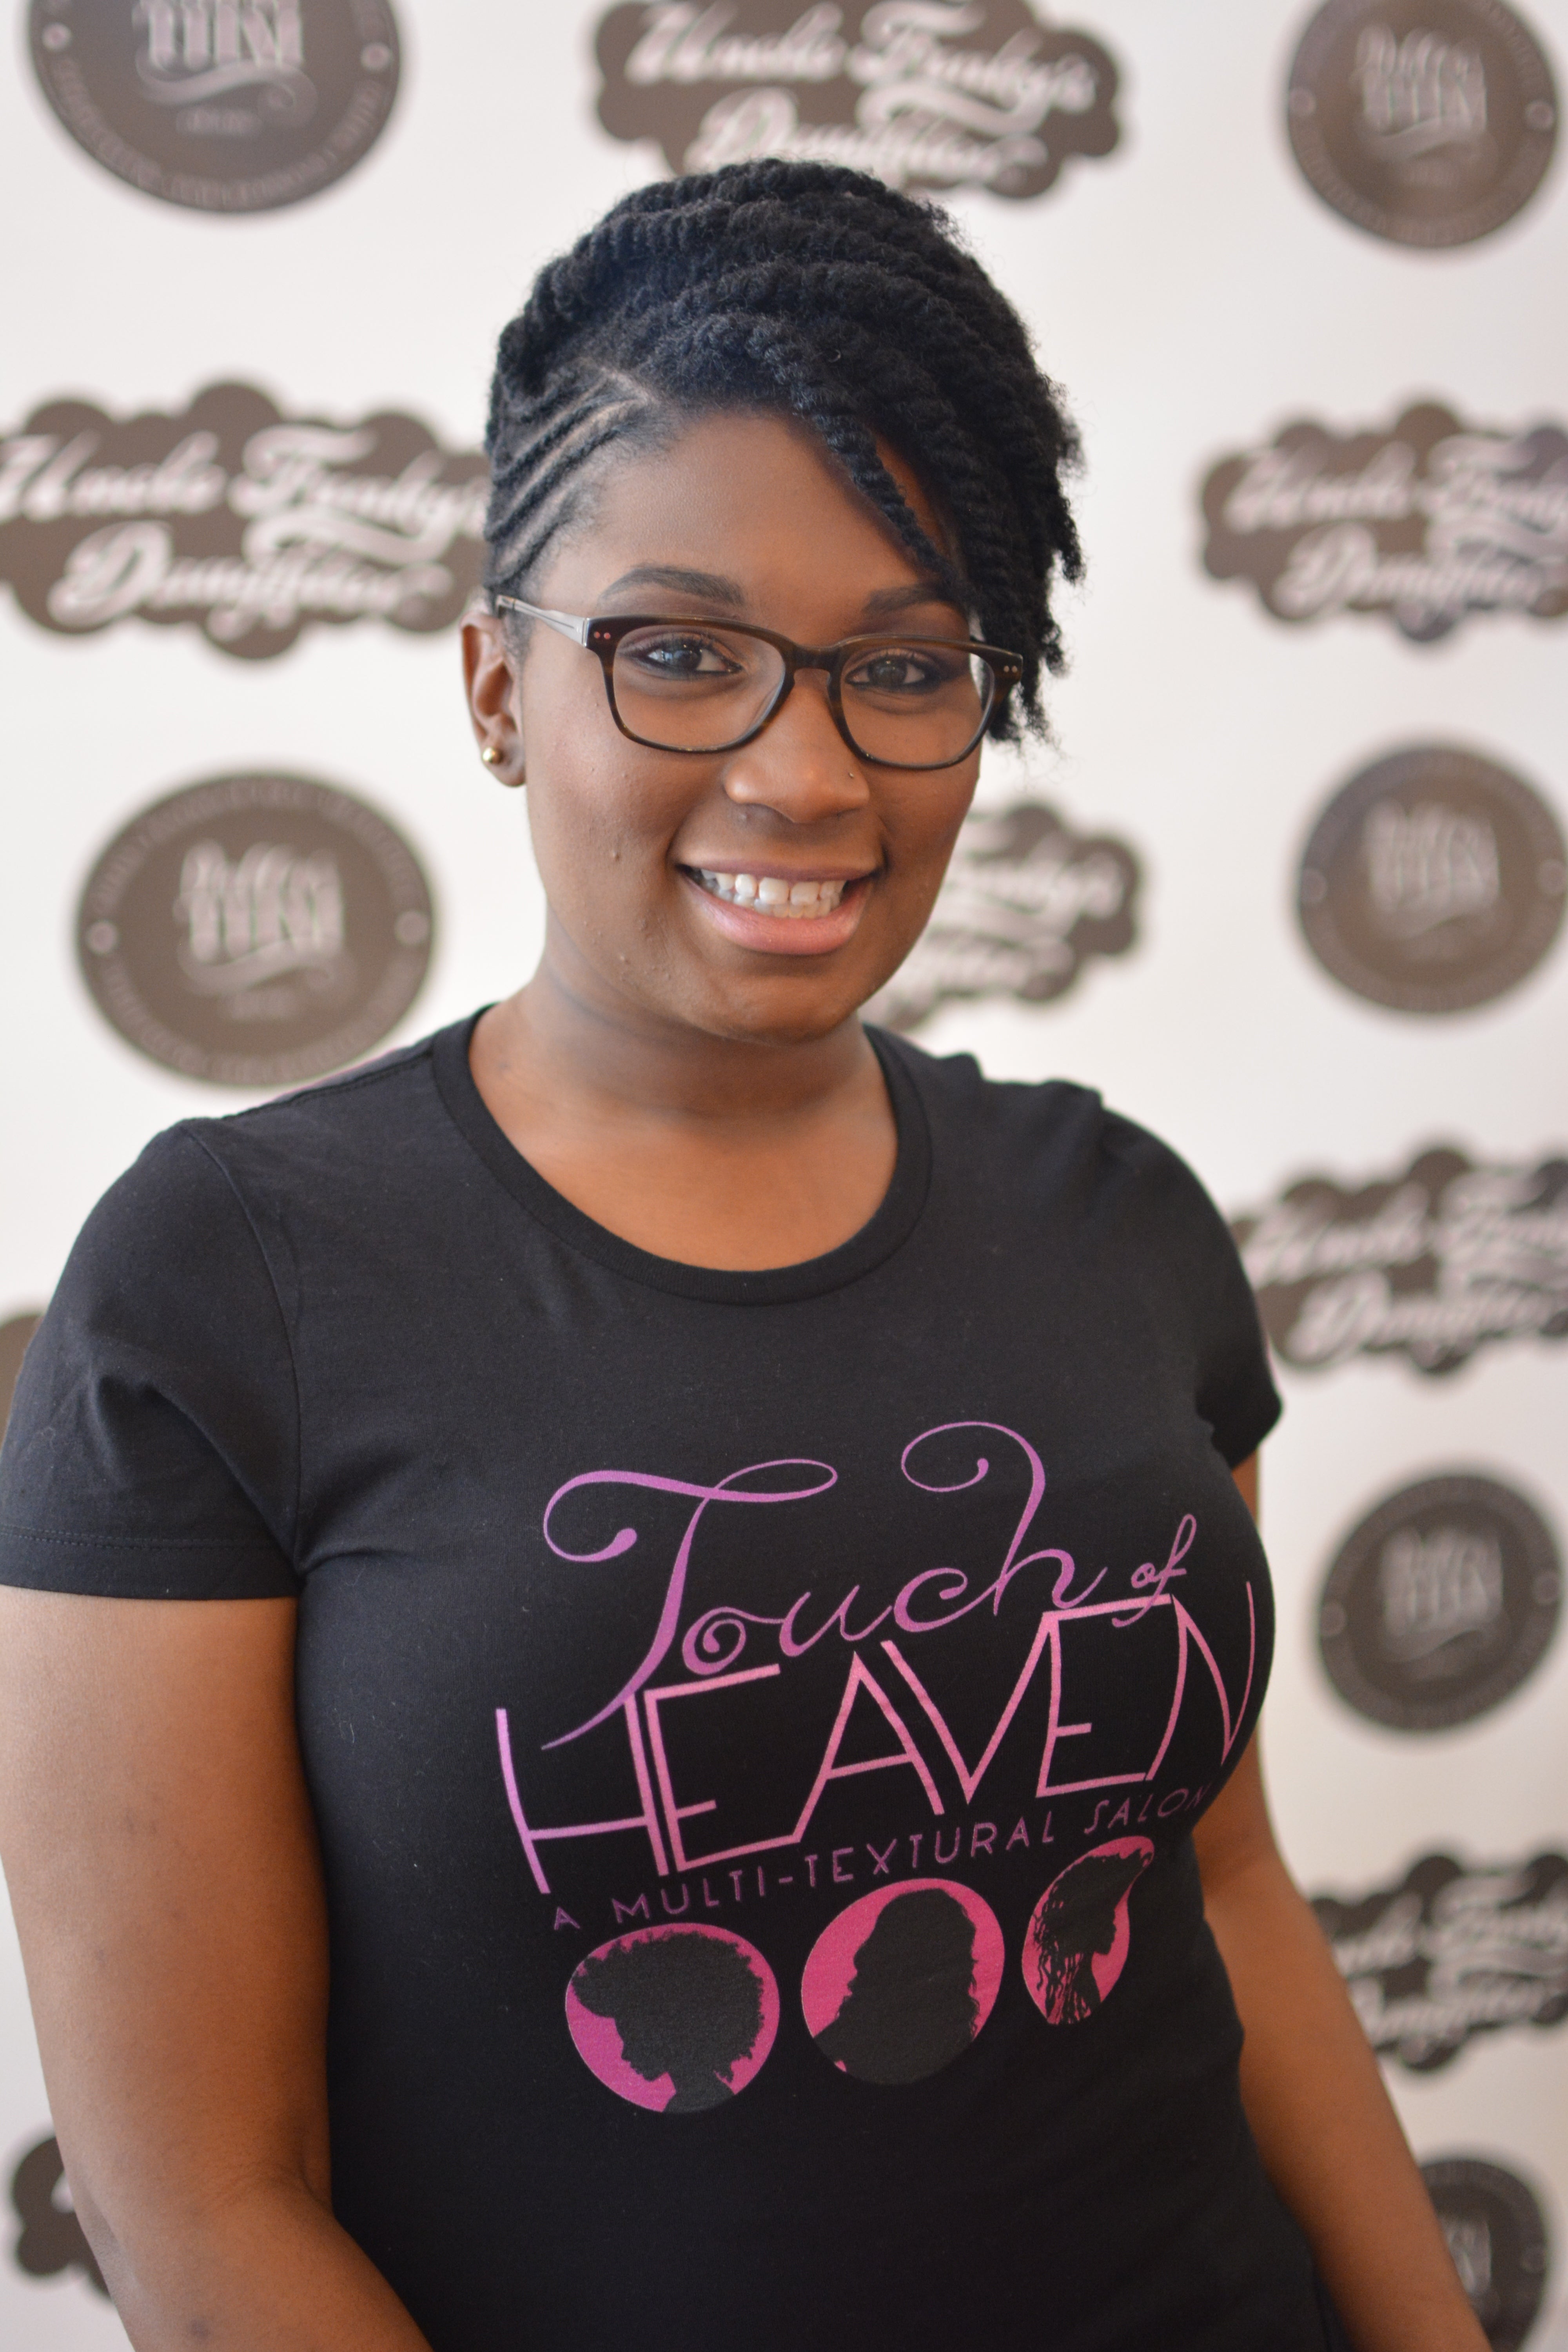 Hair Street Style: Dallas Girls Brings Natural Curls To Life
